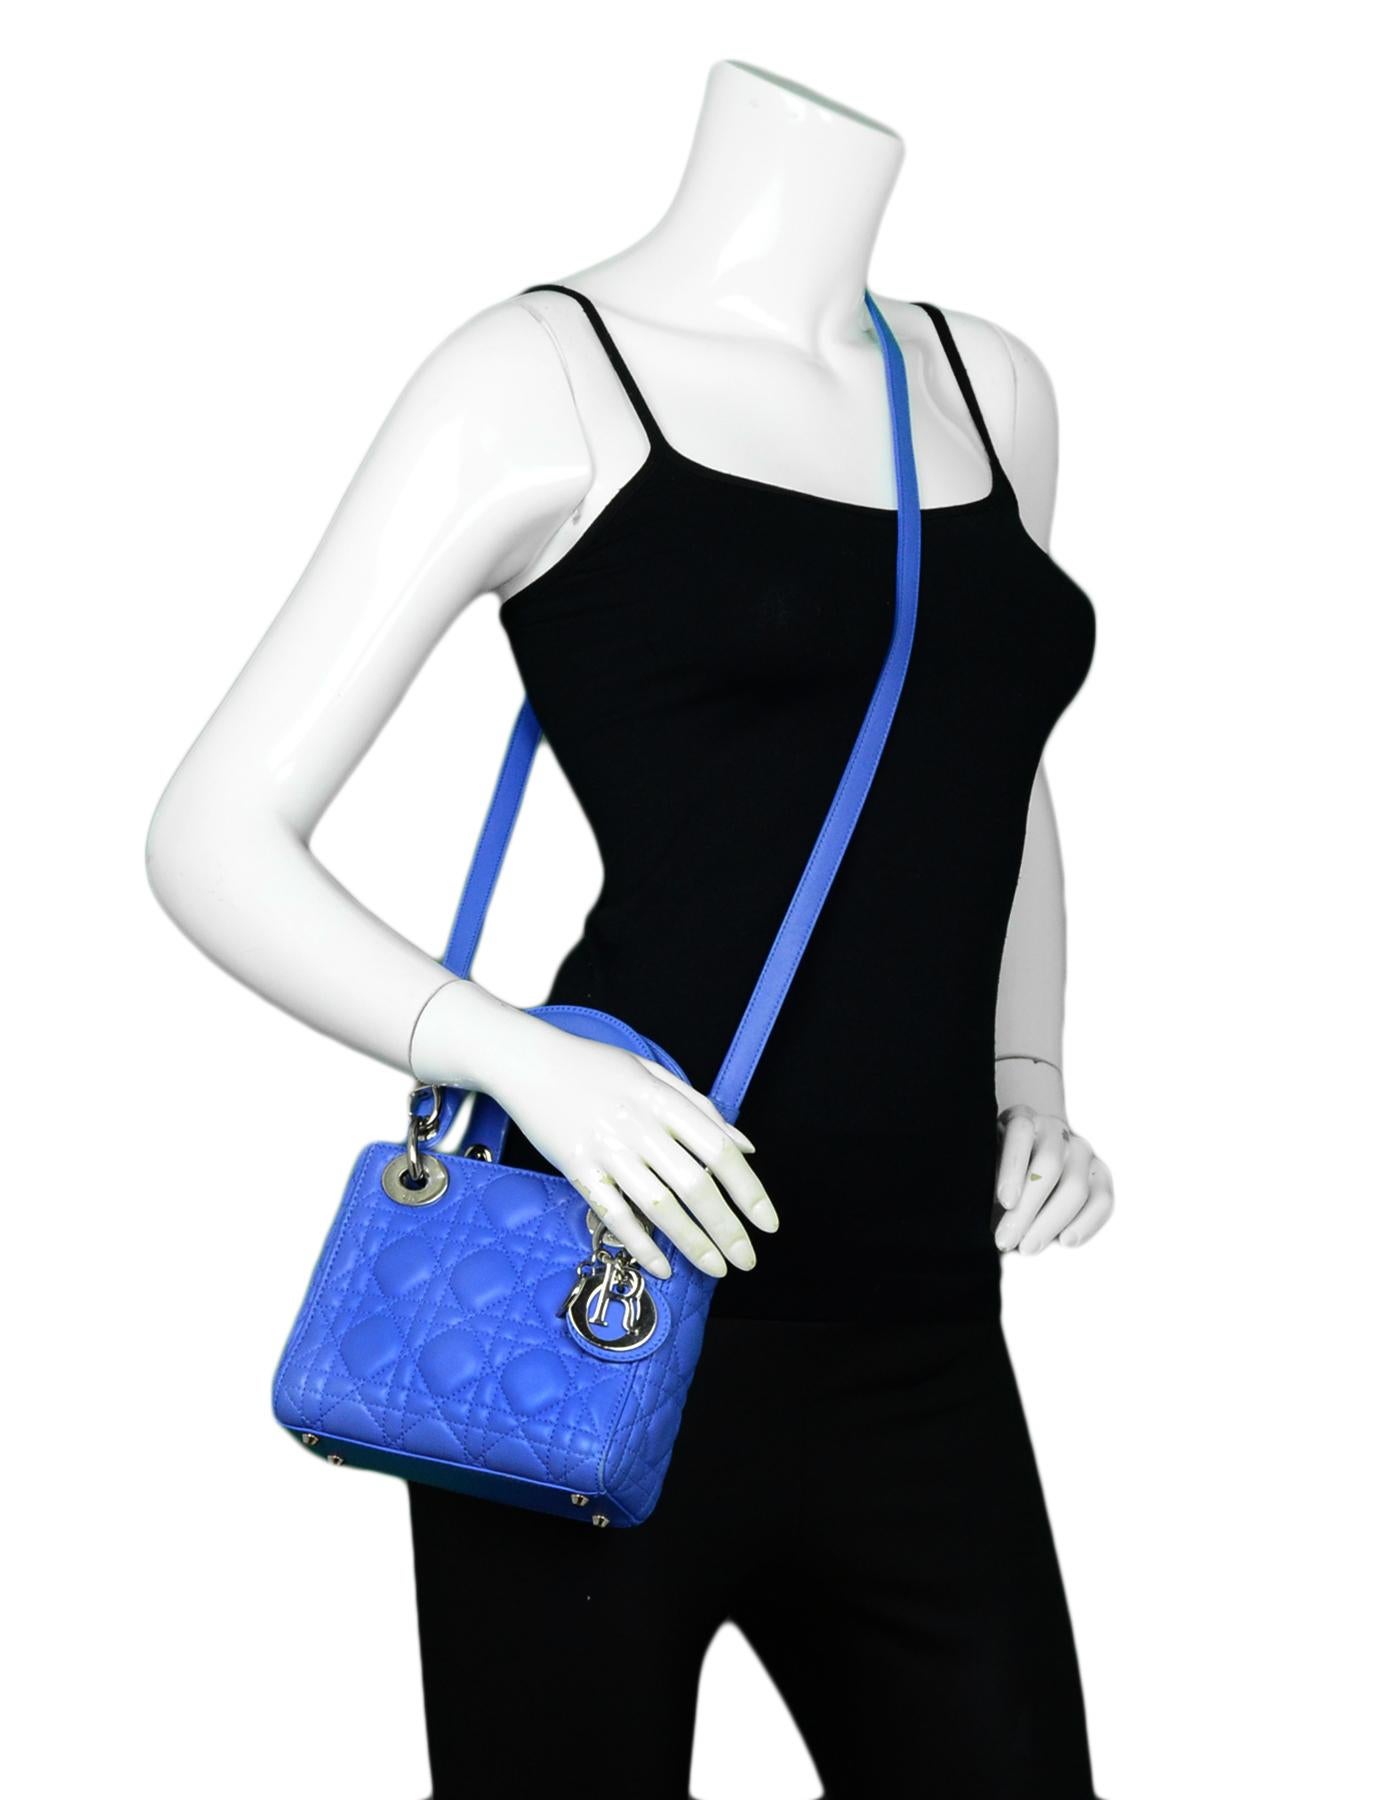 Christian Dior Blue Lambskin Leather Cannage Quilted Mini Lady Dior Crossbody Bag

Made In: Italy
Color: Blue
Hardware: Silvertone
Materials: Lambskin Leather
Lining: Fine textile 
Closure/Opening: Open top
Exterior Pockets: None
Interior Pockets: